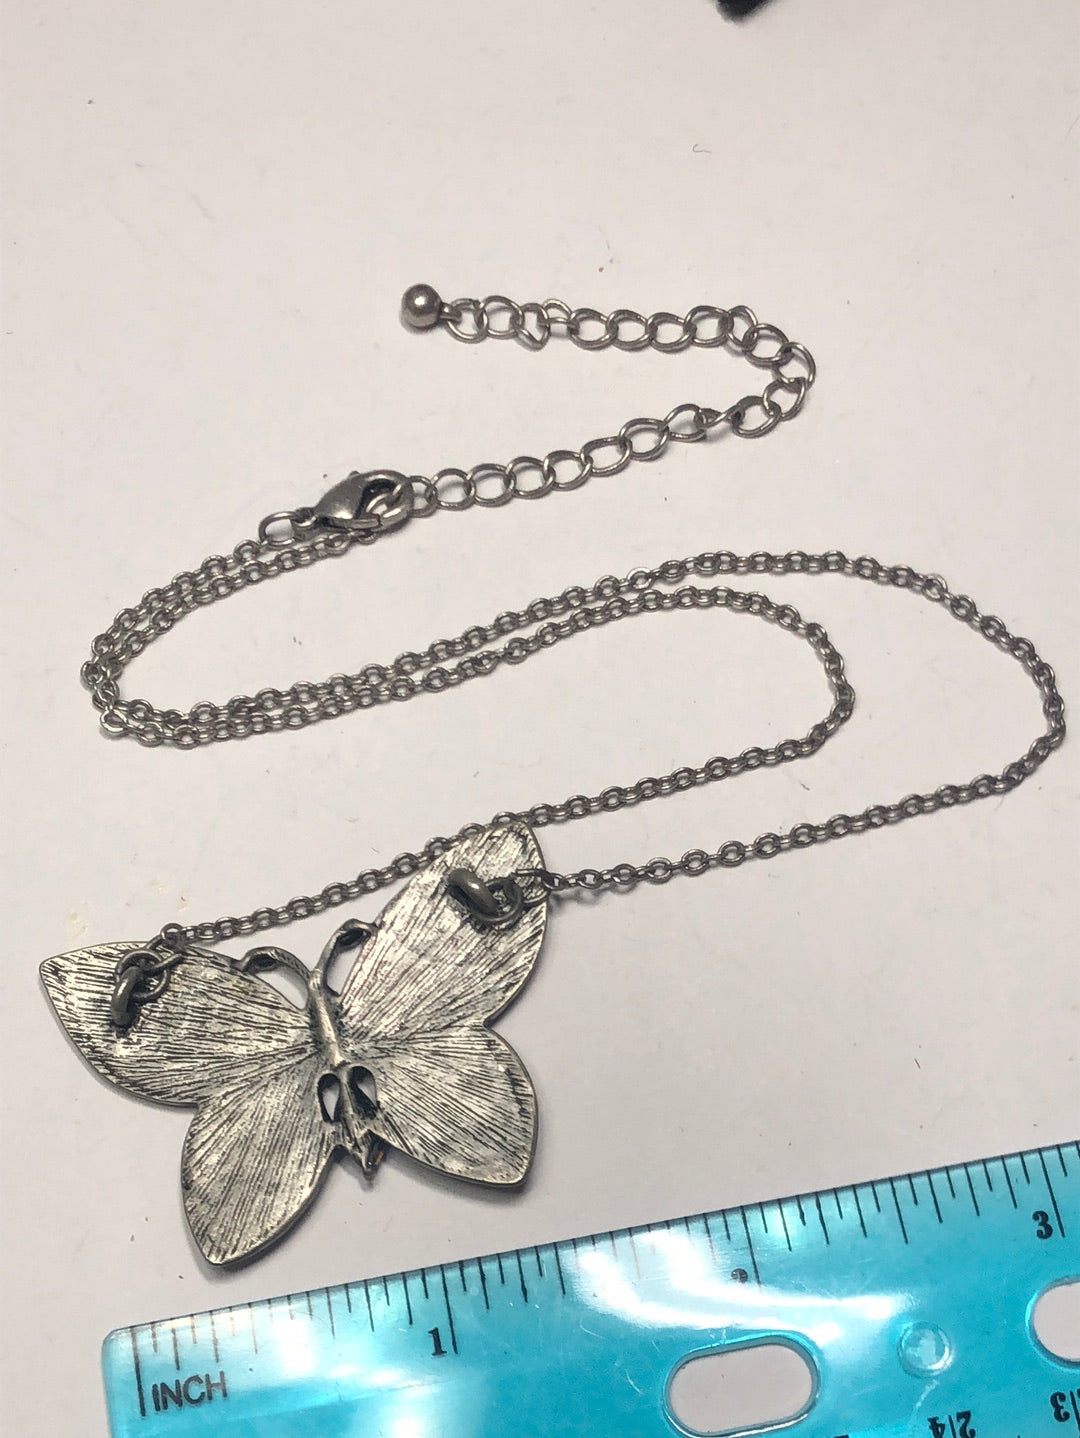 Butterfly pendant necklace blue glass rhinestone pewter tone